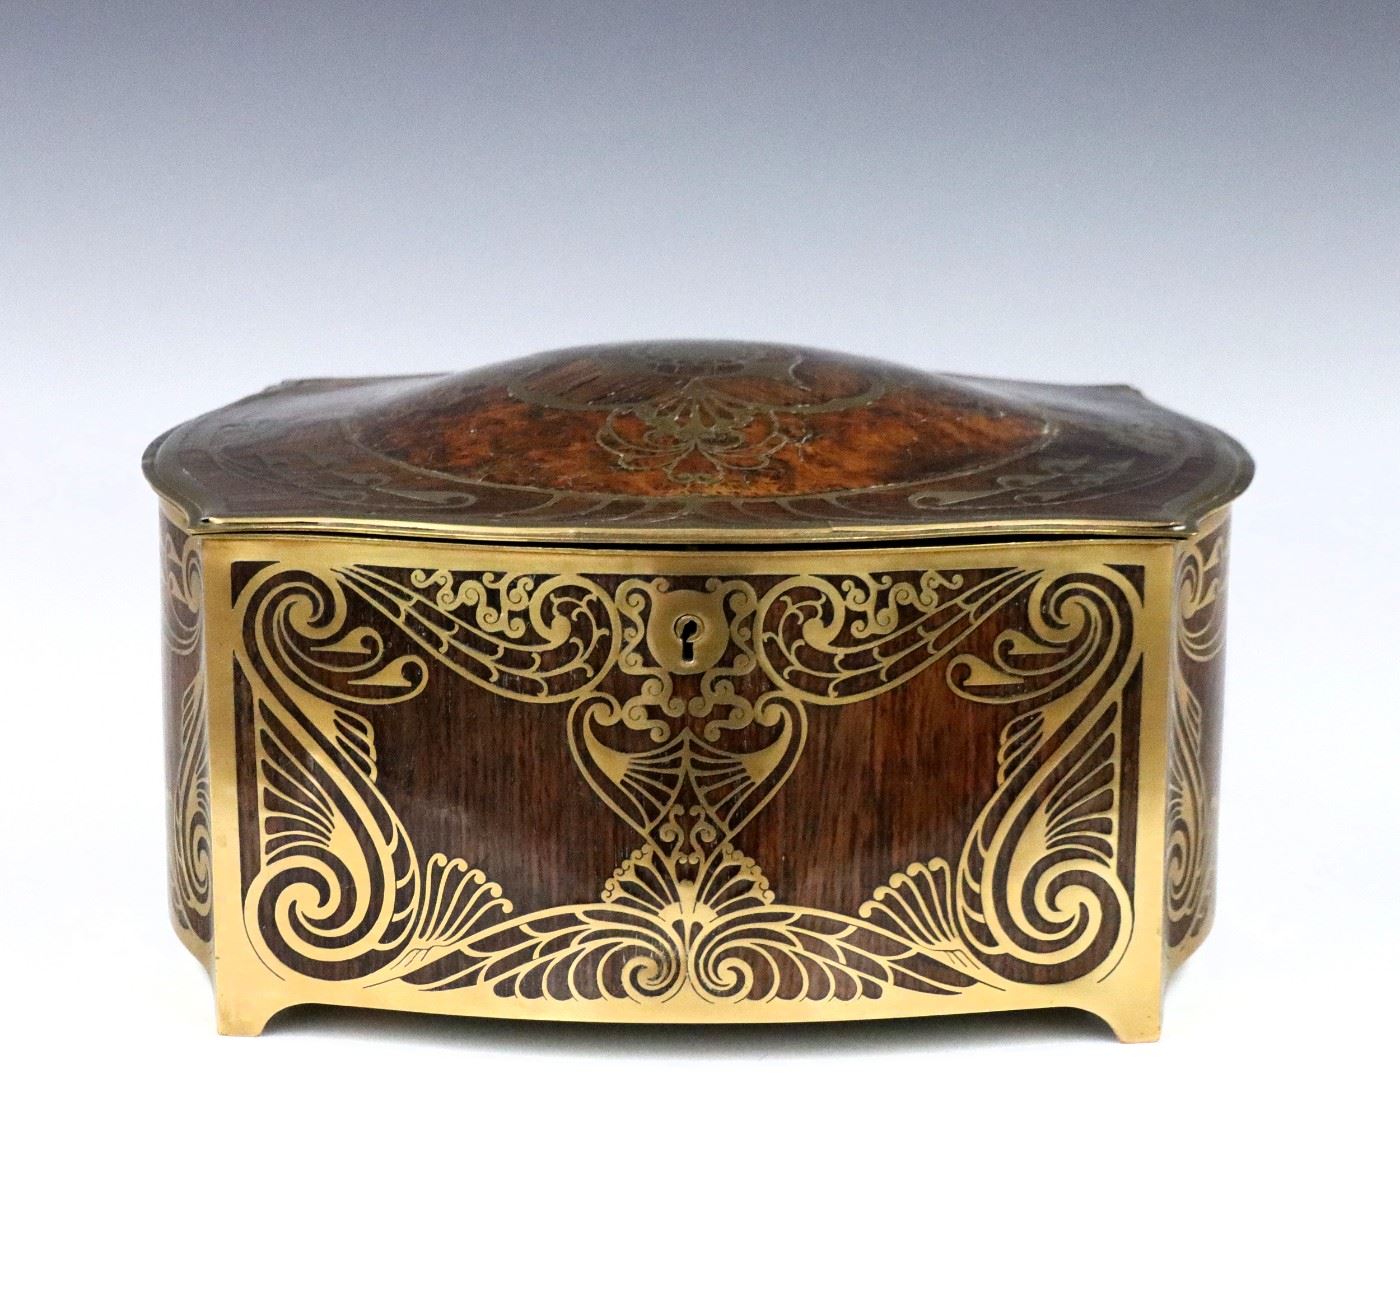 A turn of the century Erhard & Sohne Jugendstil inlaid box, c. 1905.  Fine Rosewood construction with domed Burl top and Brass inlay depicting scrolling florals in the Art Nouveau manner, within a Brass frame with short bracket feet.  Hinged top opens to reveal a single compartment with velvet lining.  